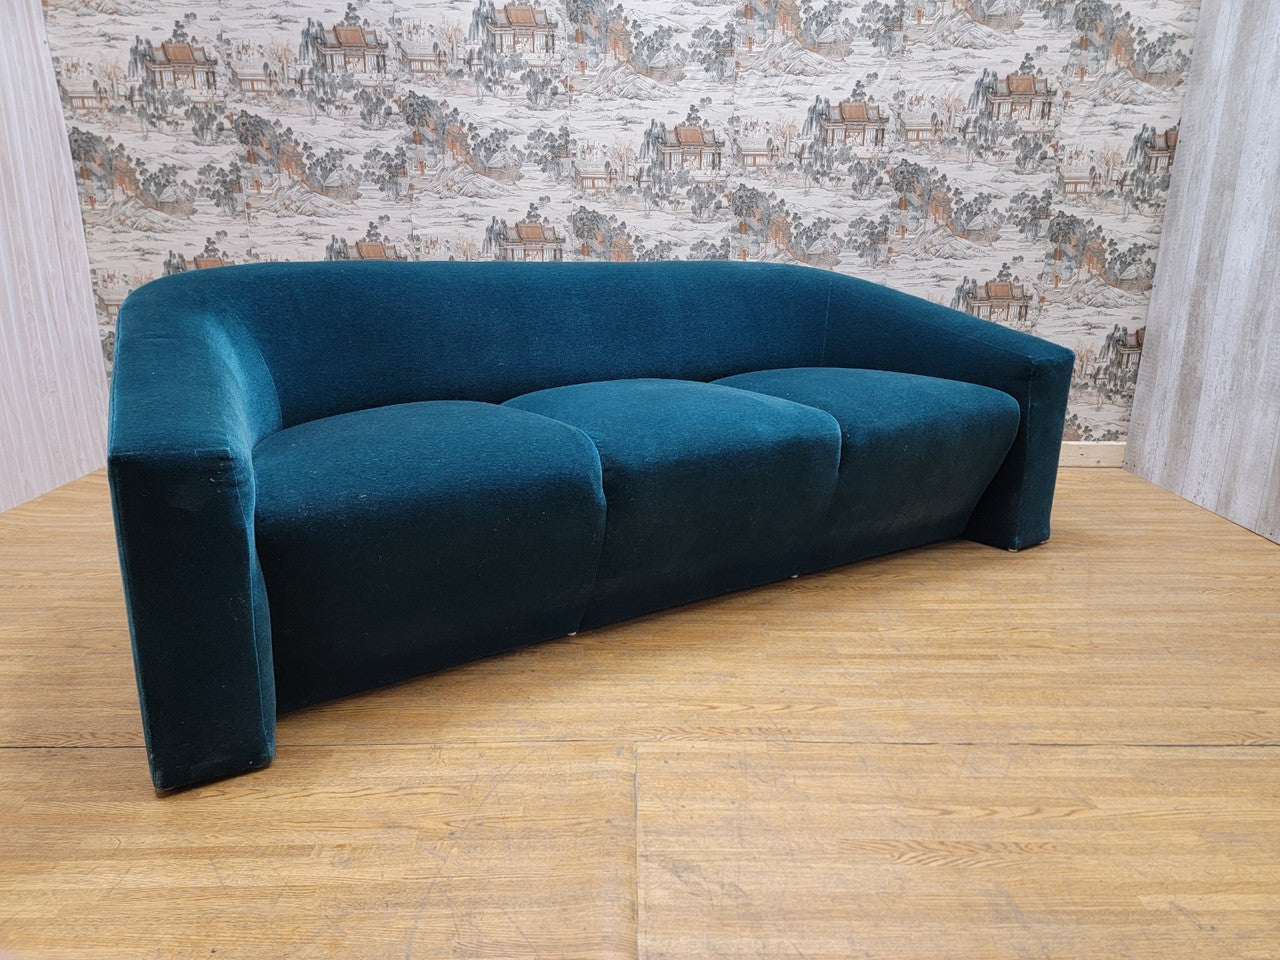 Vintage Contemporary Modern Donghia 3 Seat Curved Arm Sofa & Lounge Chair in Mohair - Set of 2